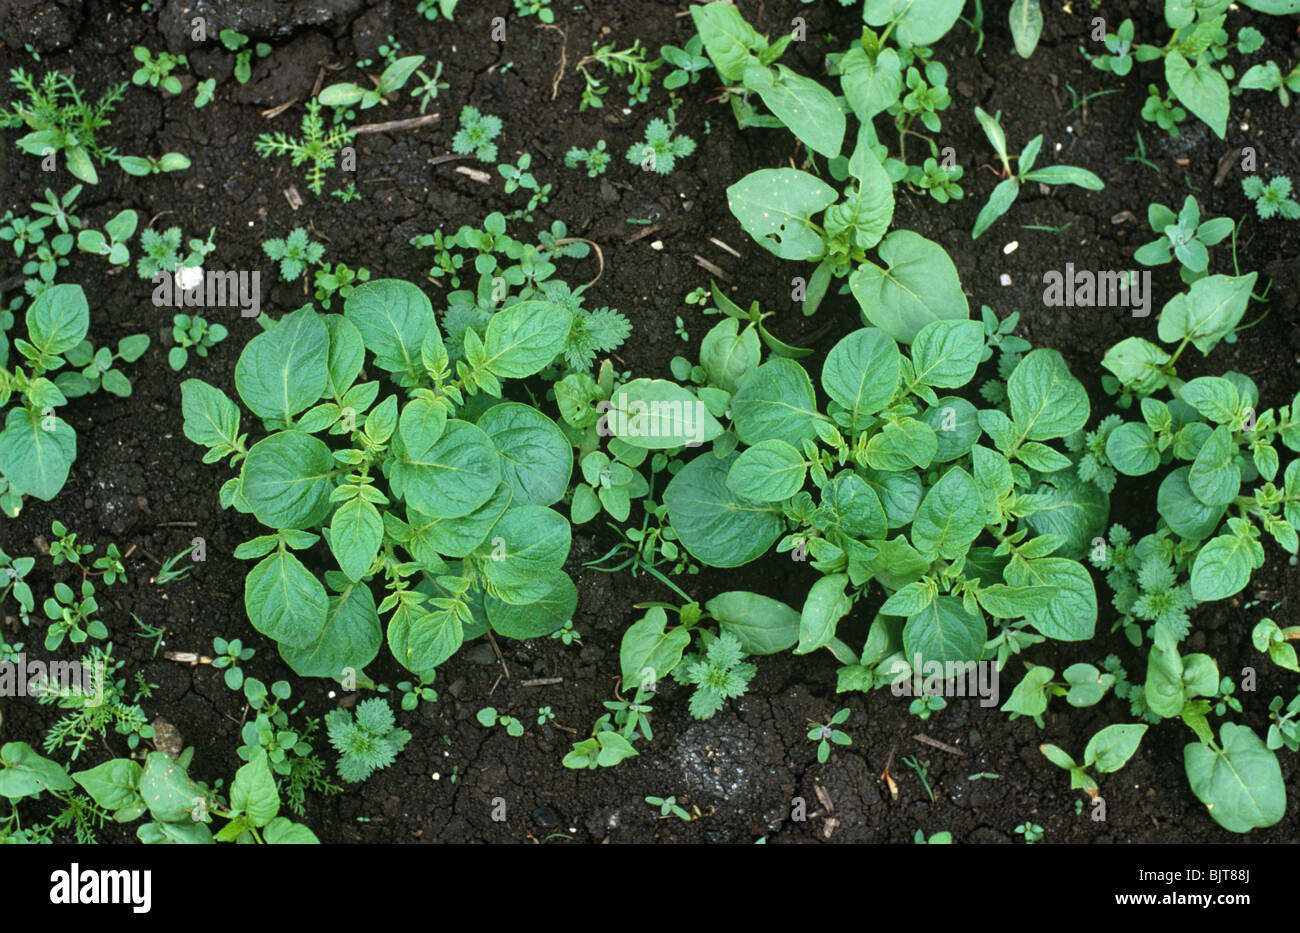 Seedling and young mixed Fenland broad-leaved weeds in young potato crop Stock Photo